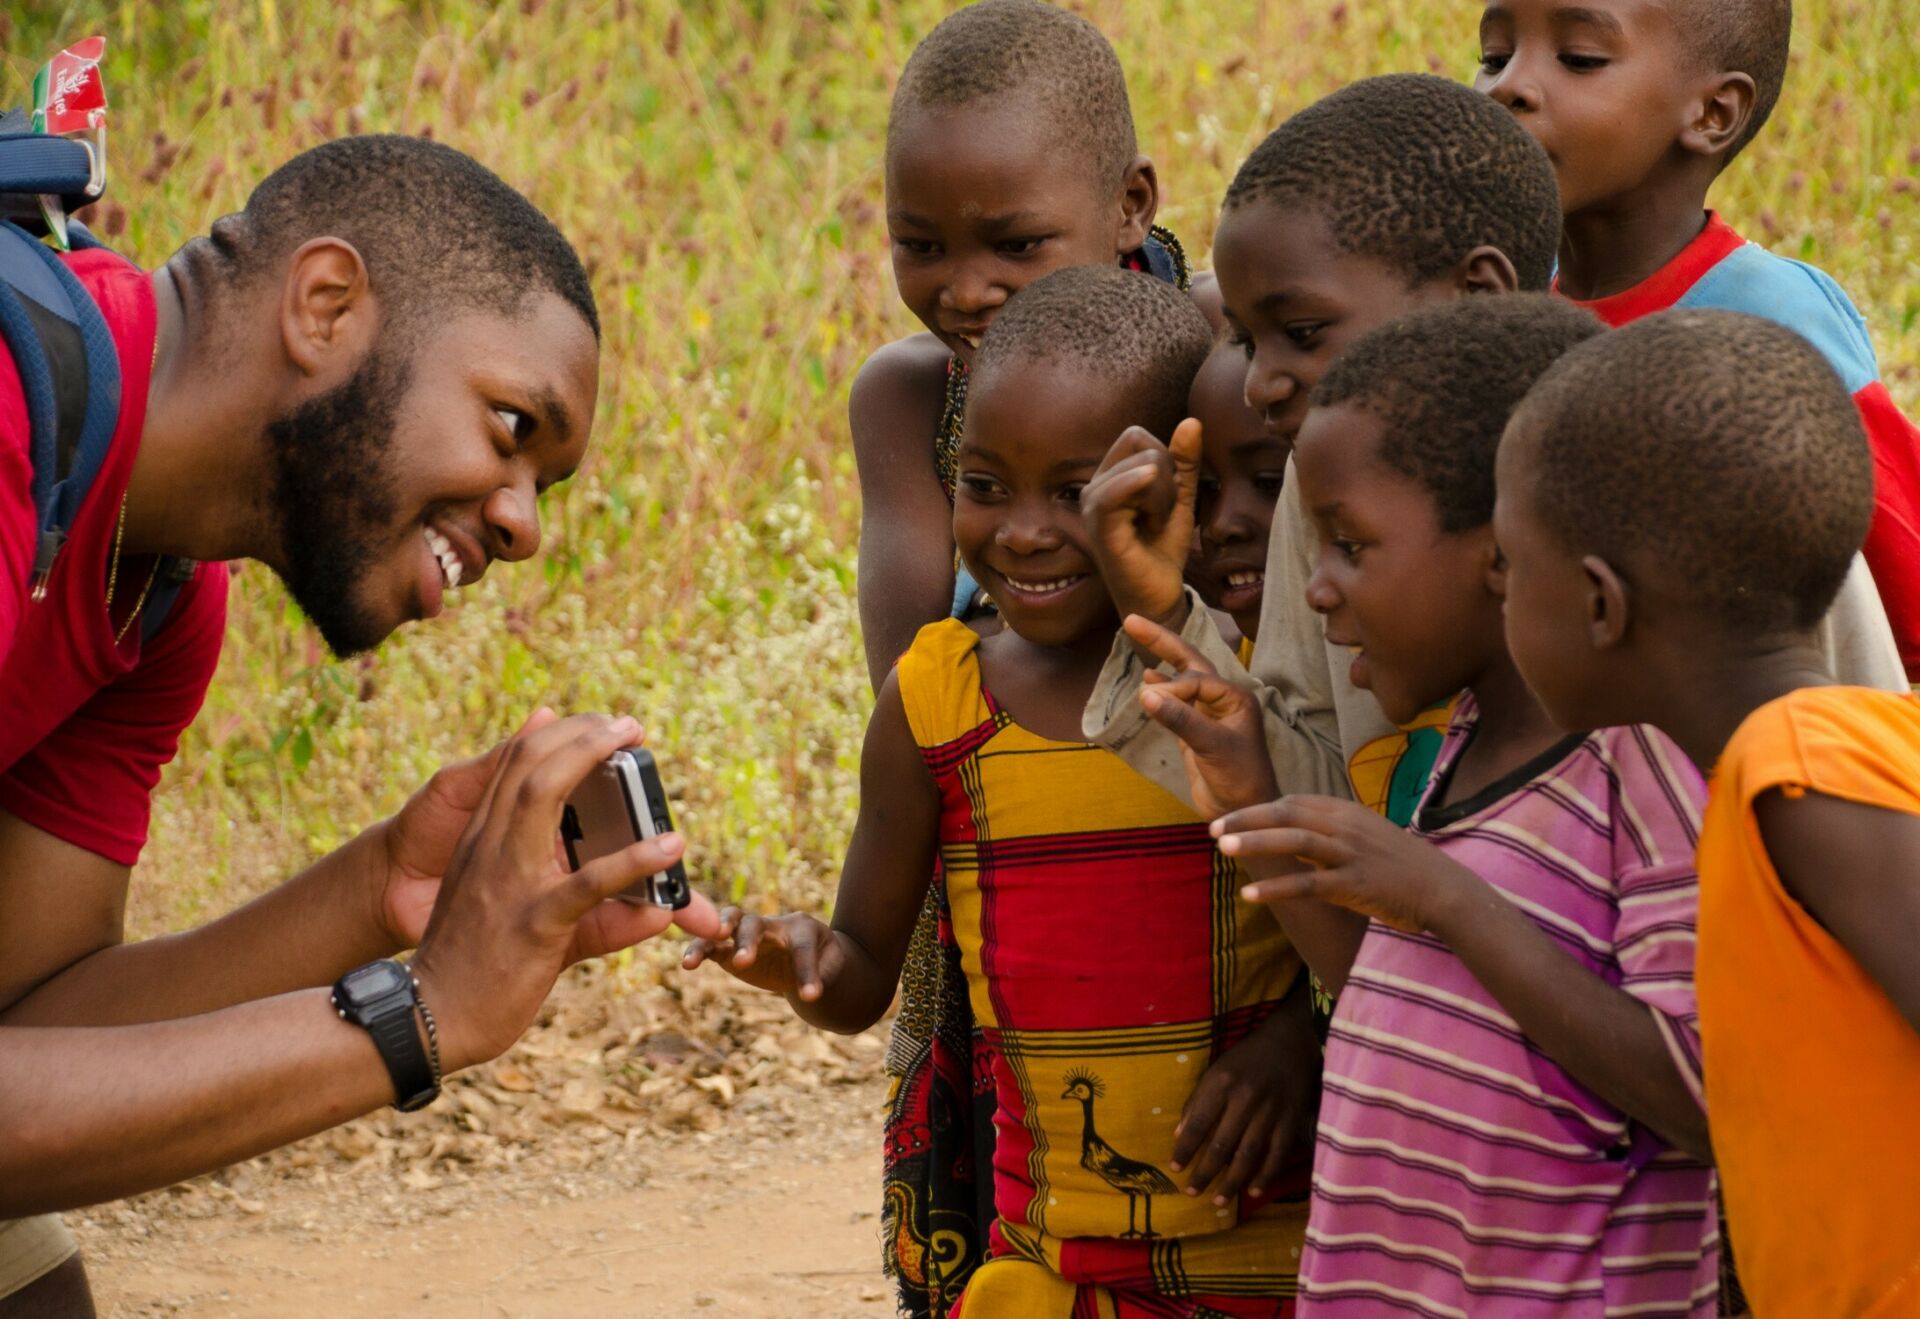 Close-up of Penn State Landscape Architecture student showing a camera to a group of smiling Tanzanian children